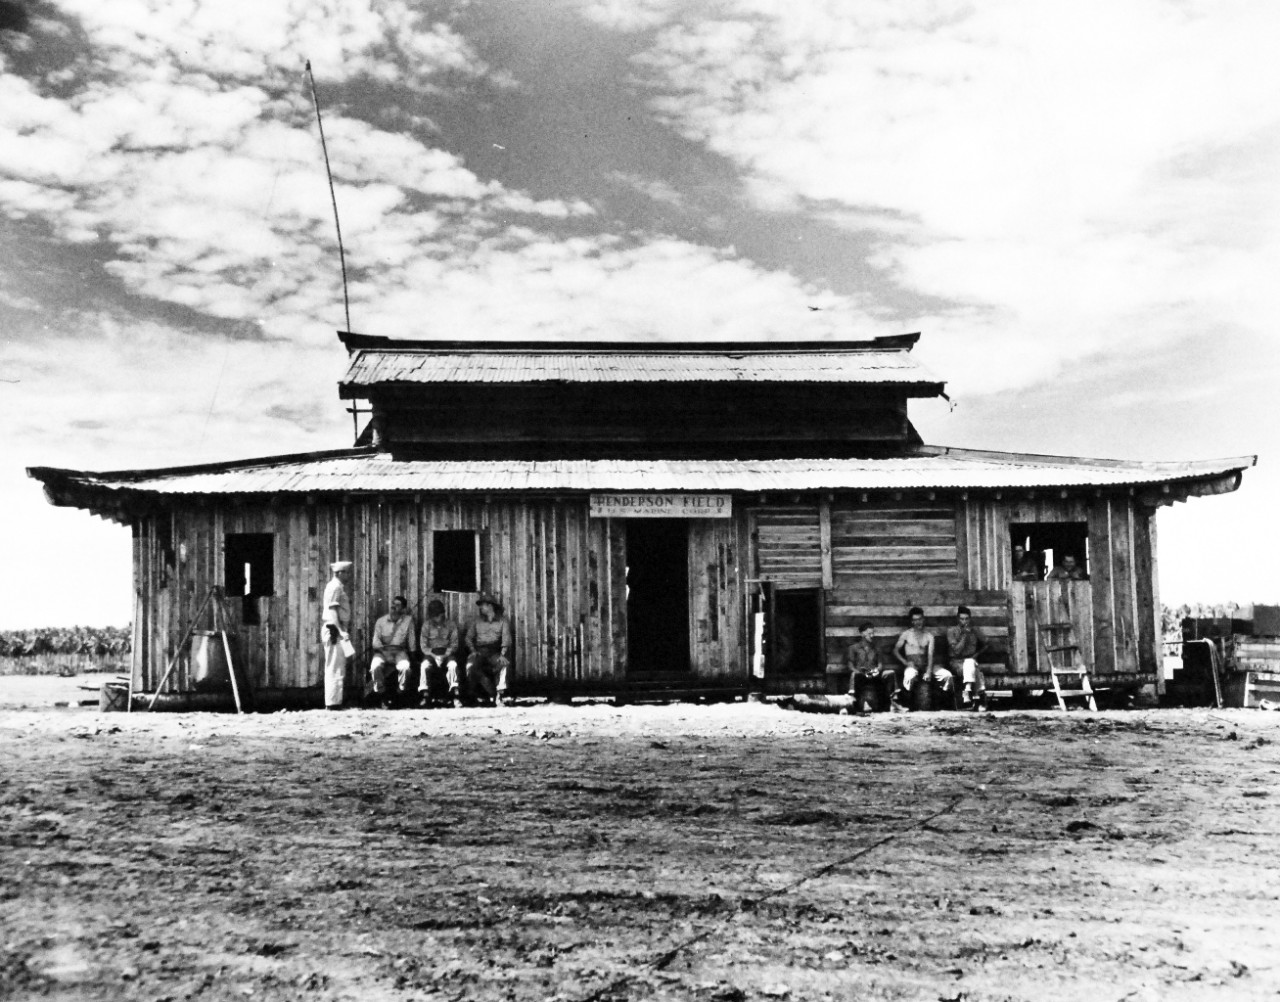 80-G-20703:  Guadalcanal Campaign, August 1942-February 1943.   Pagoda, used by headquarters for Marine and Navy fliers at Henderson Field, Guadalcanal Island.  After surviving numerous Japanese bombings, the building was torn down following a near miss which rendered it useless as a shelter. U.S. Navy photograph, now in the collections of the National Archives.  (2015/11/17).